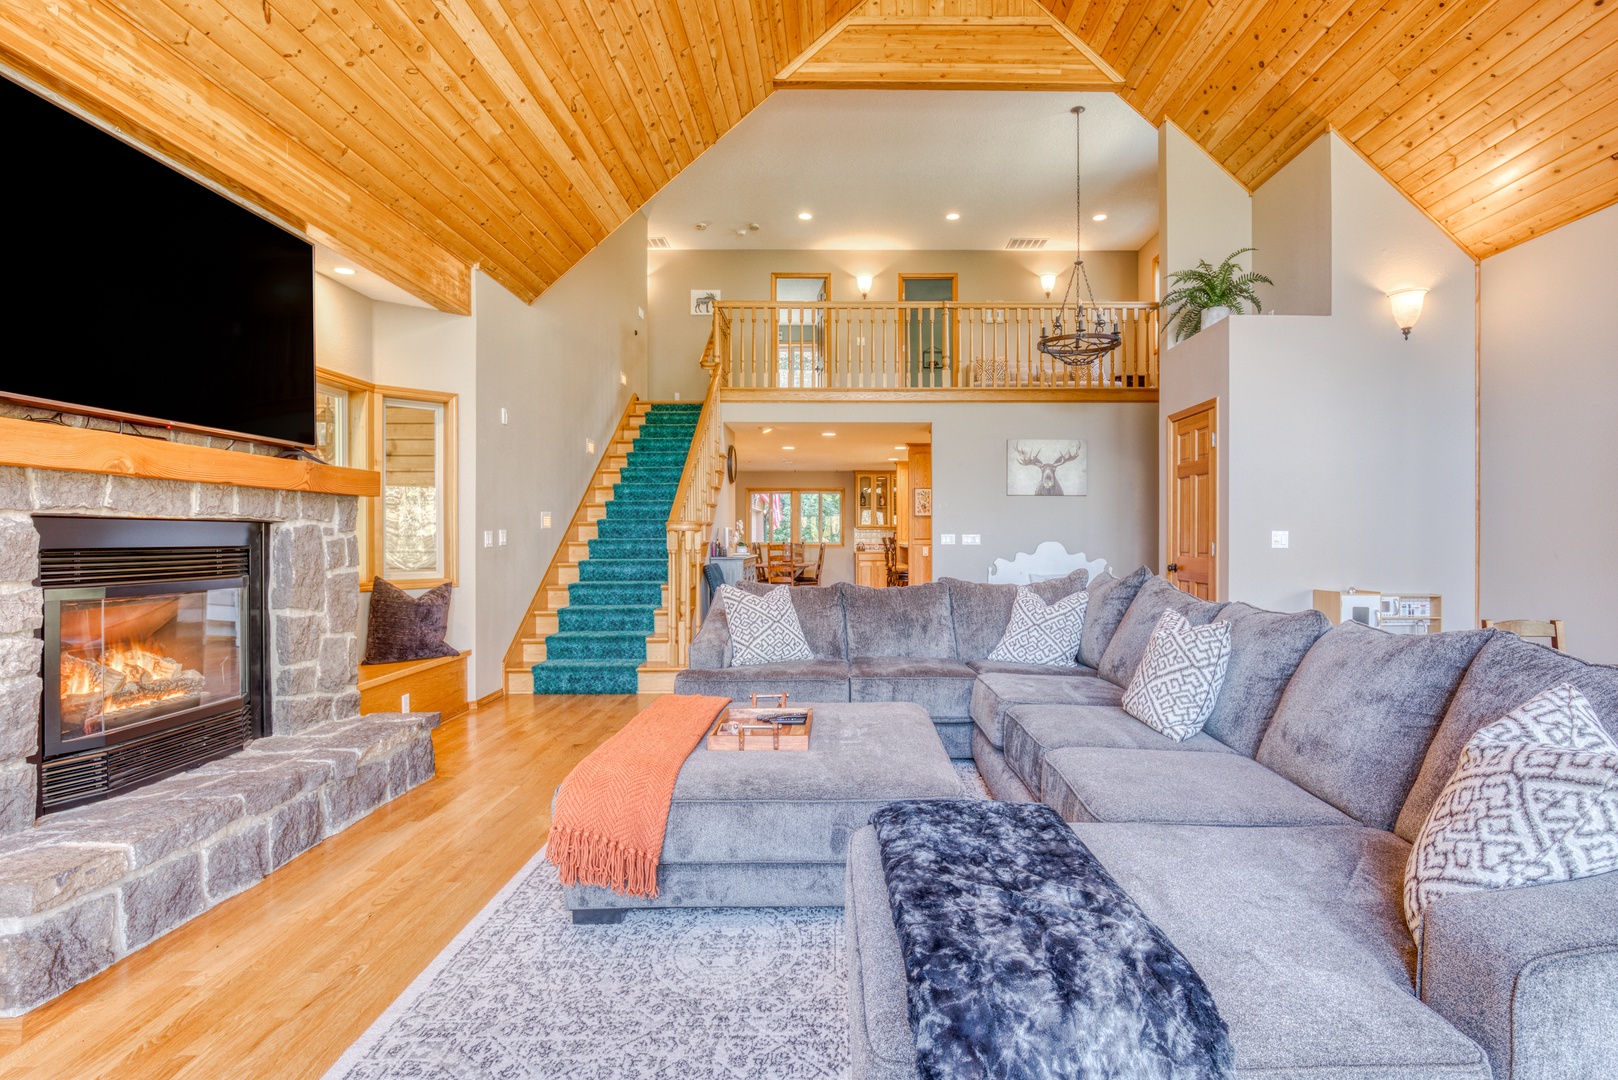 Sandy Vacation Rentals, Iron Mountain - Two floors divide the home giving a private space dedicated to sleep time